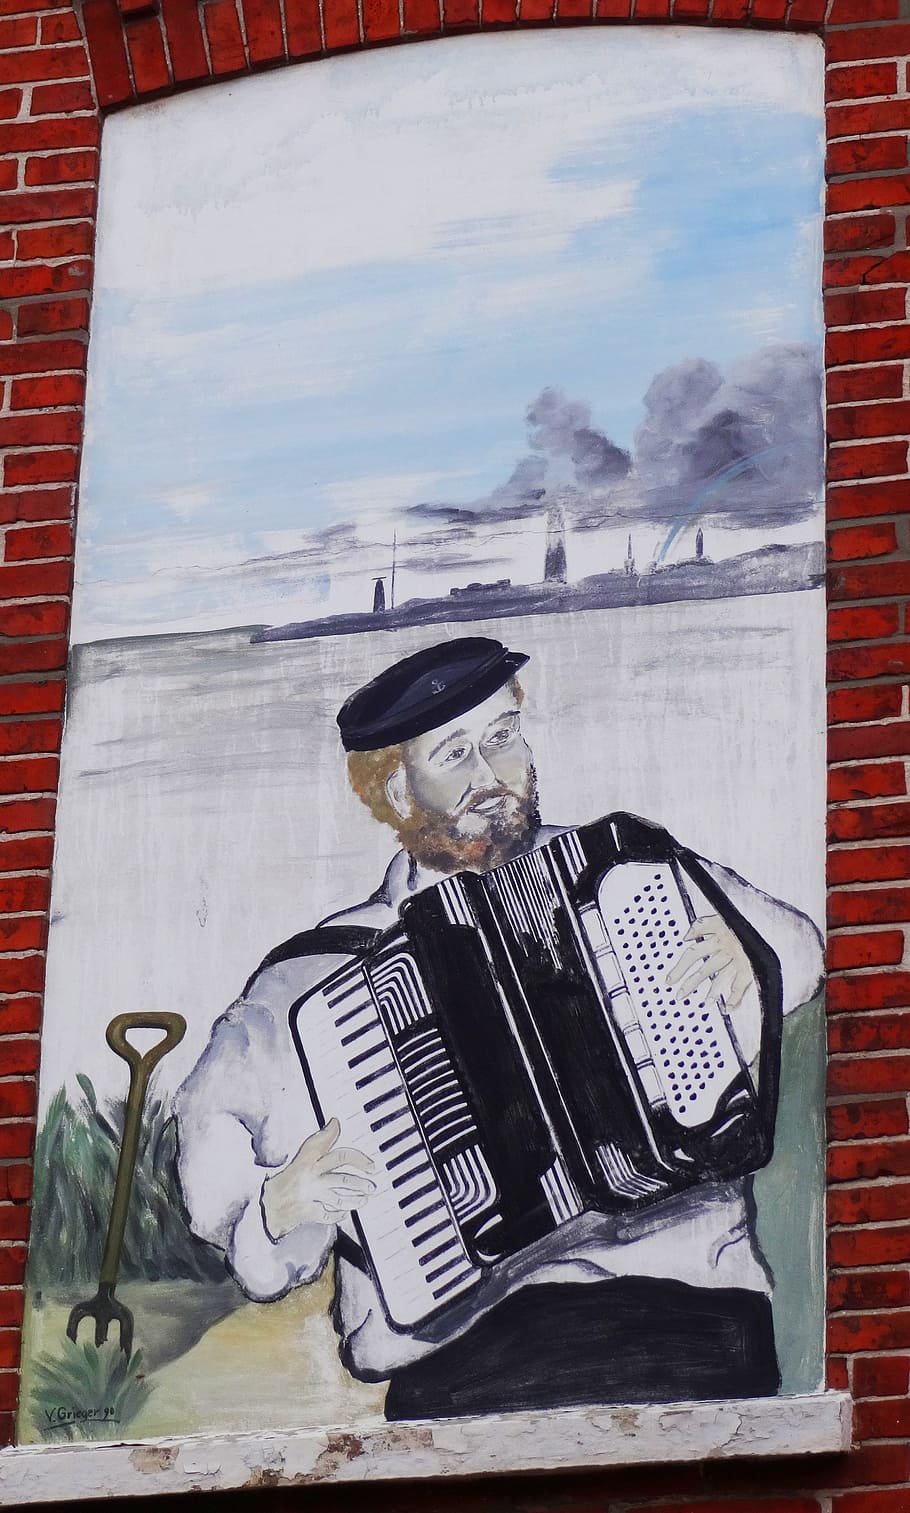 albertus the singing wattführer, building painting, sailor, accordion, wadden sea, human representation, one person, male likeness, day, real people